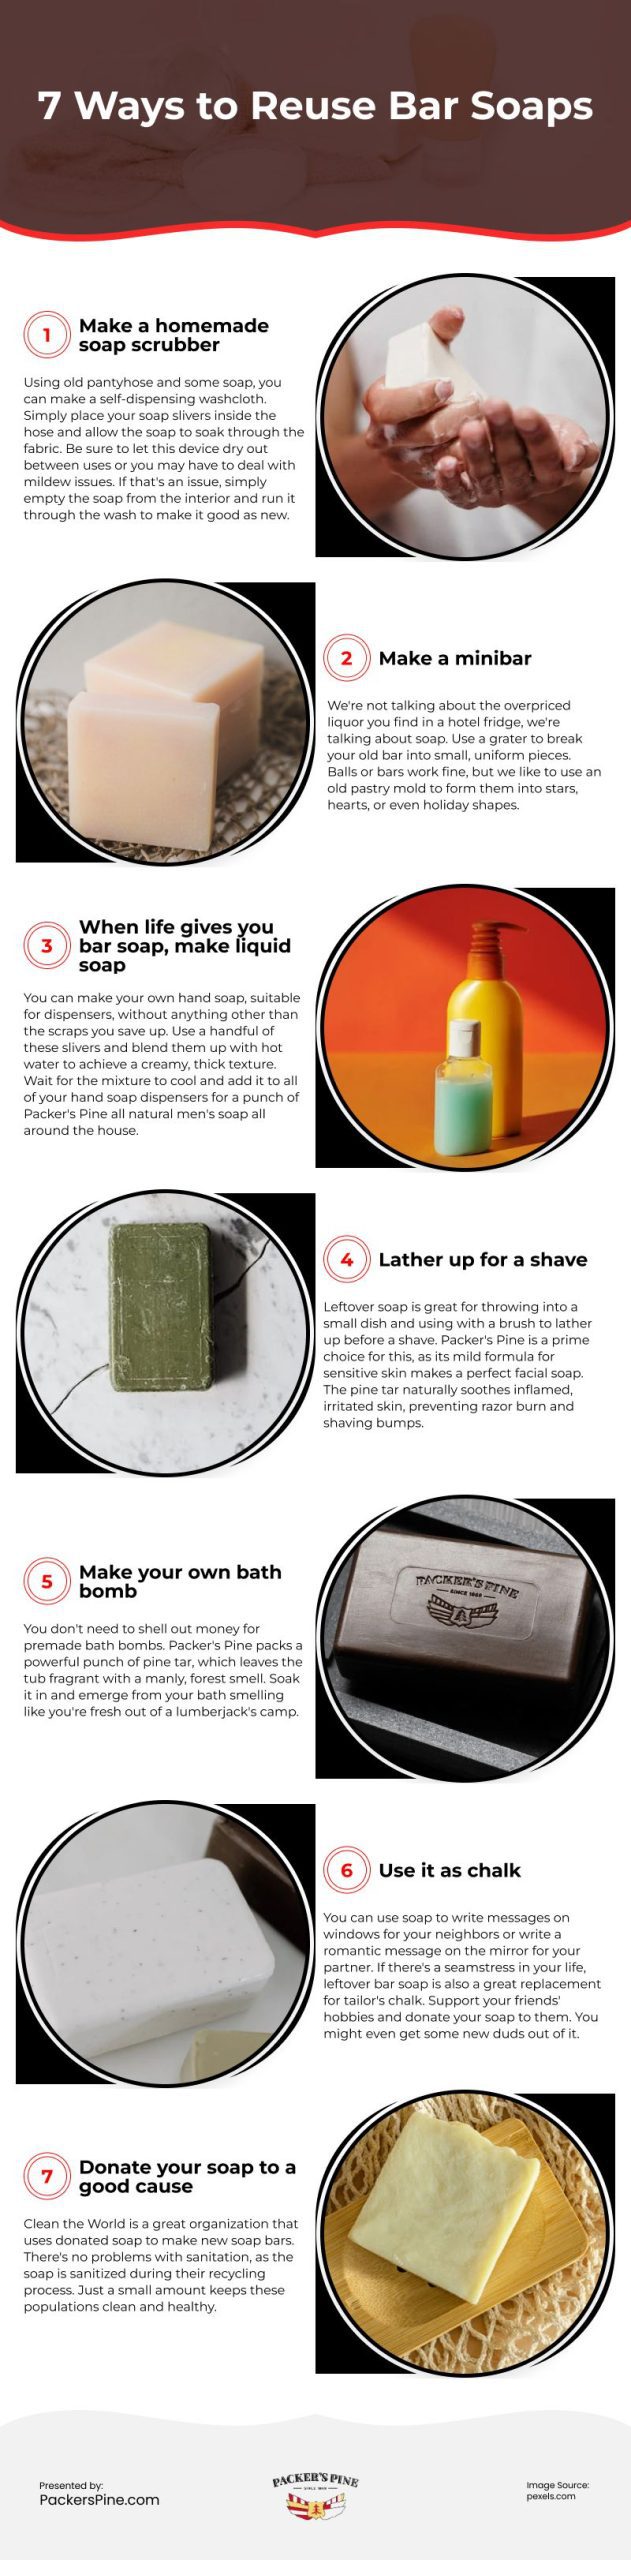 7 Ways to Reuse Bar Soaps Infographic